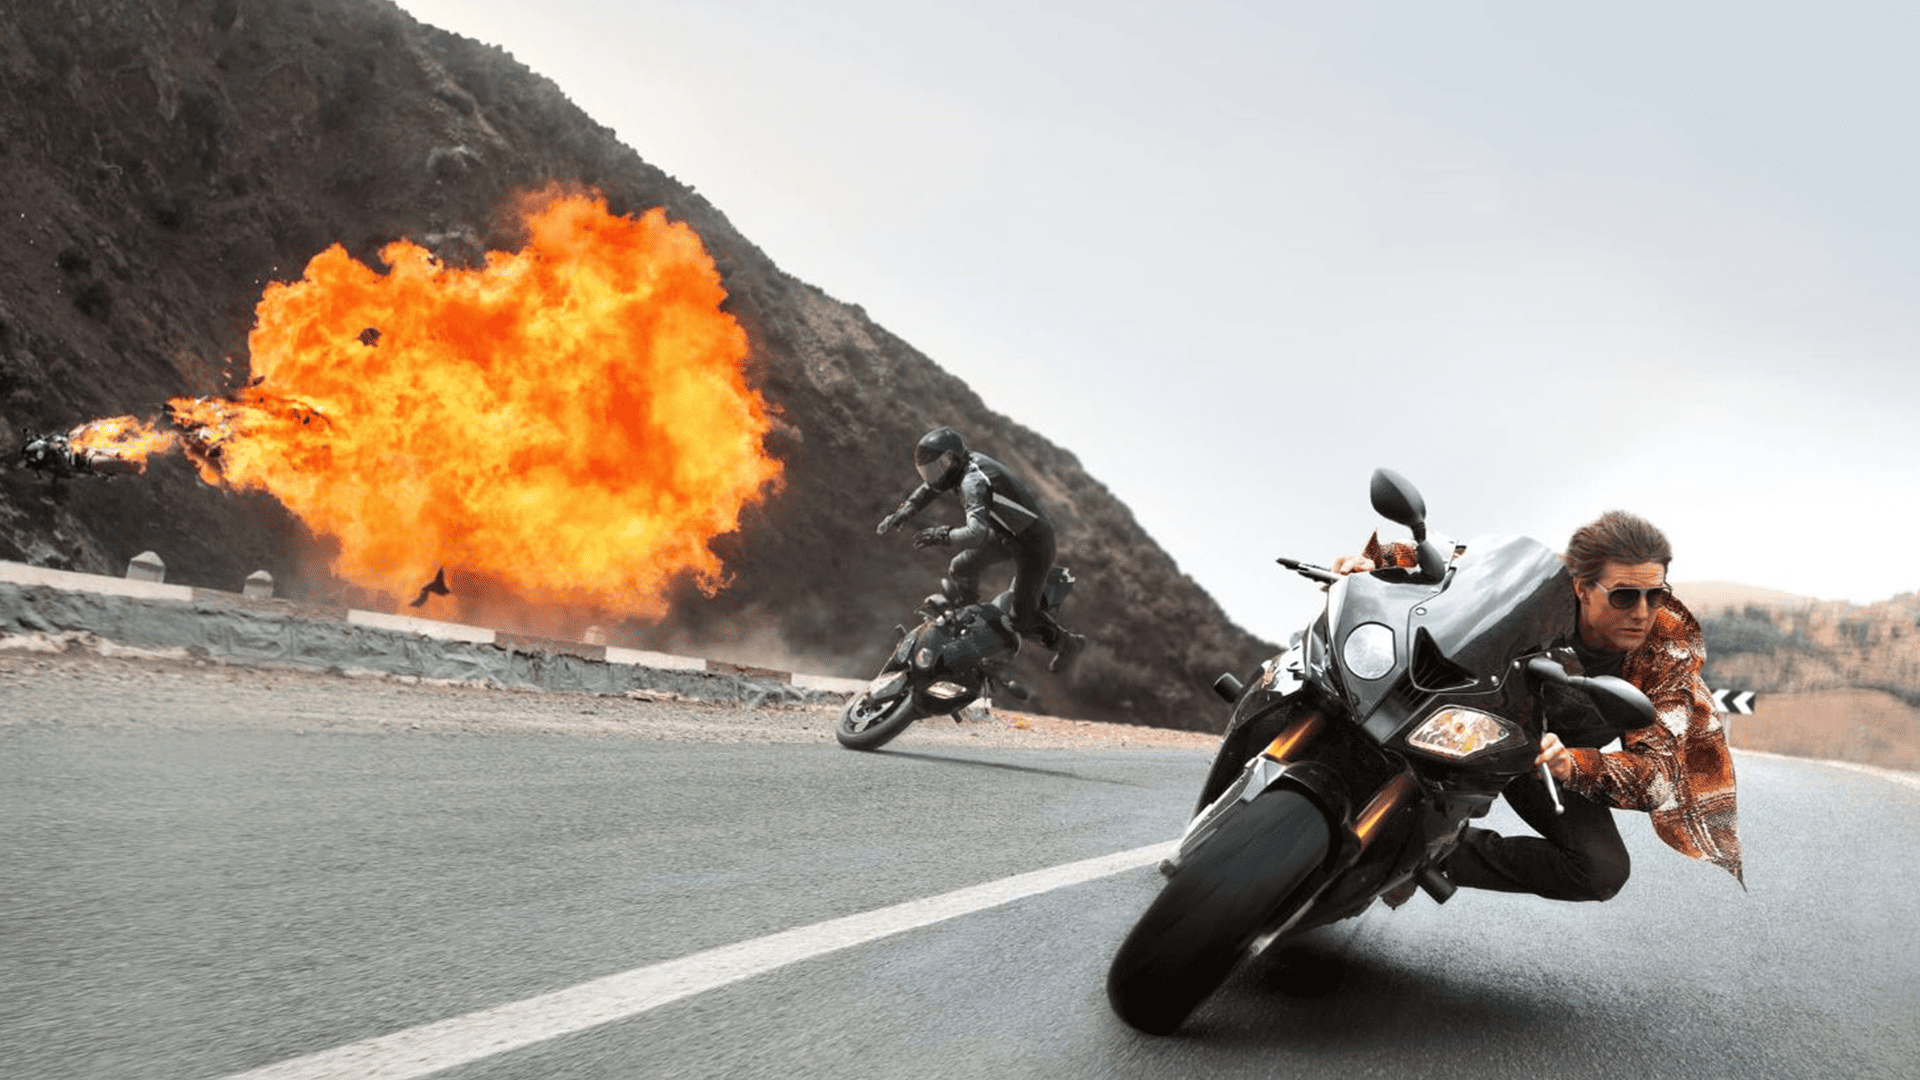 Tom Cruise engages in a dangerous, high-speed motorcycle chase in this image from Paramount Pictures.